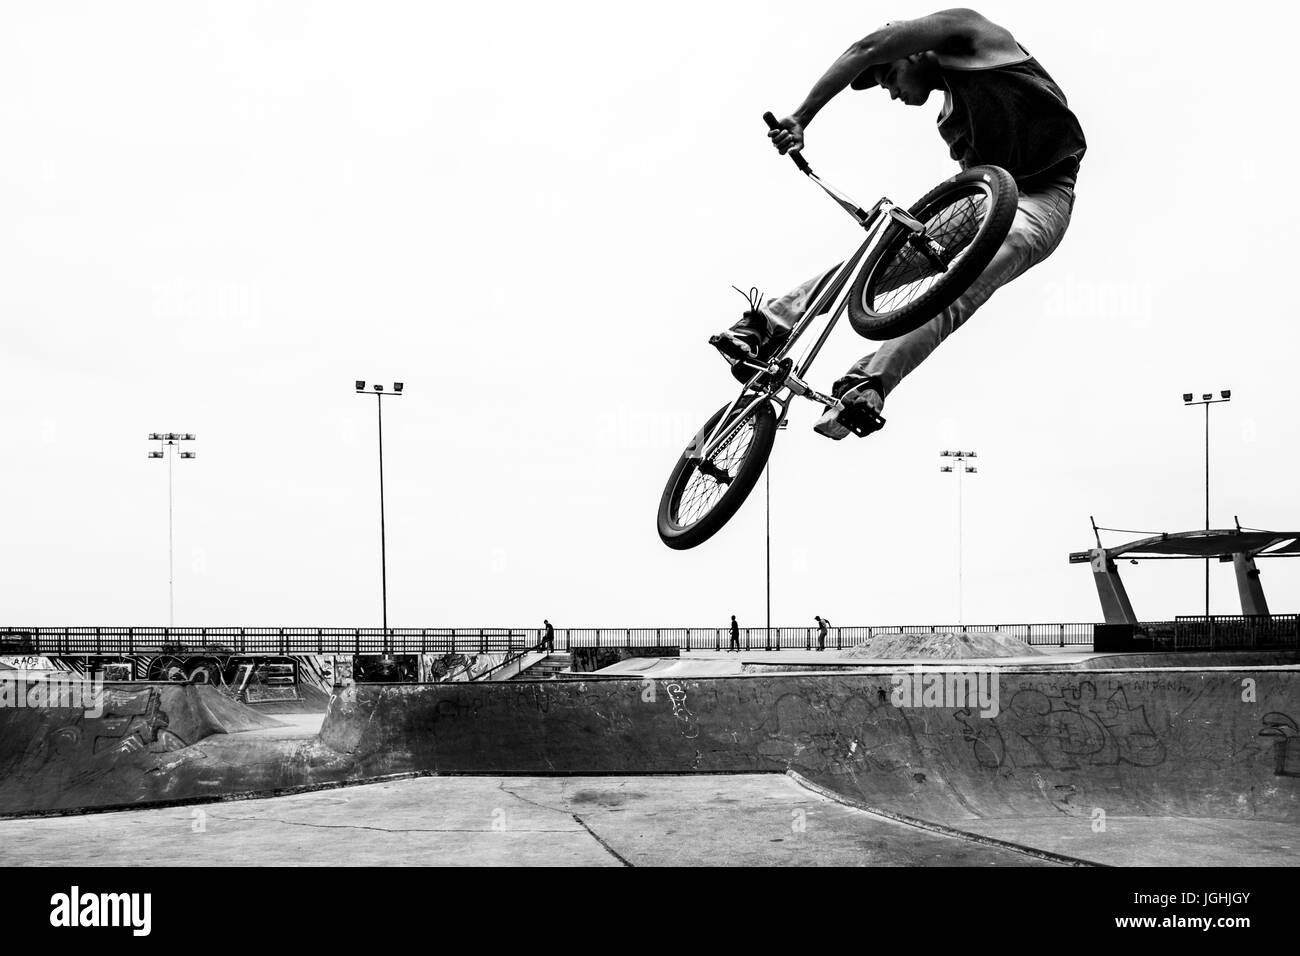 Young man jumping with a bicycle at Skatepark, in Playa Brava. Iquique, Tarapaca Region, Chile. 16.11.15 Stock Photo